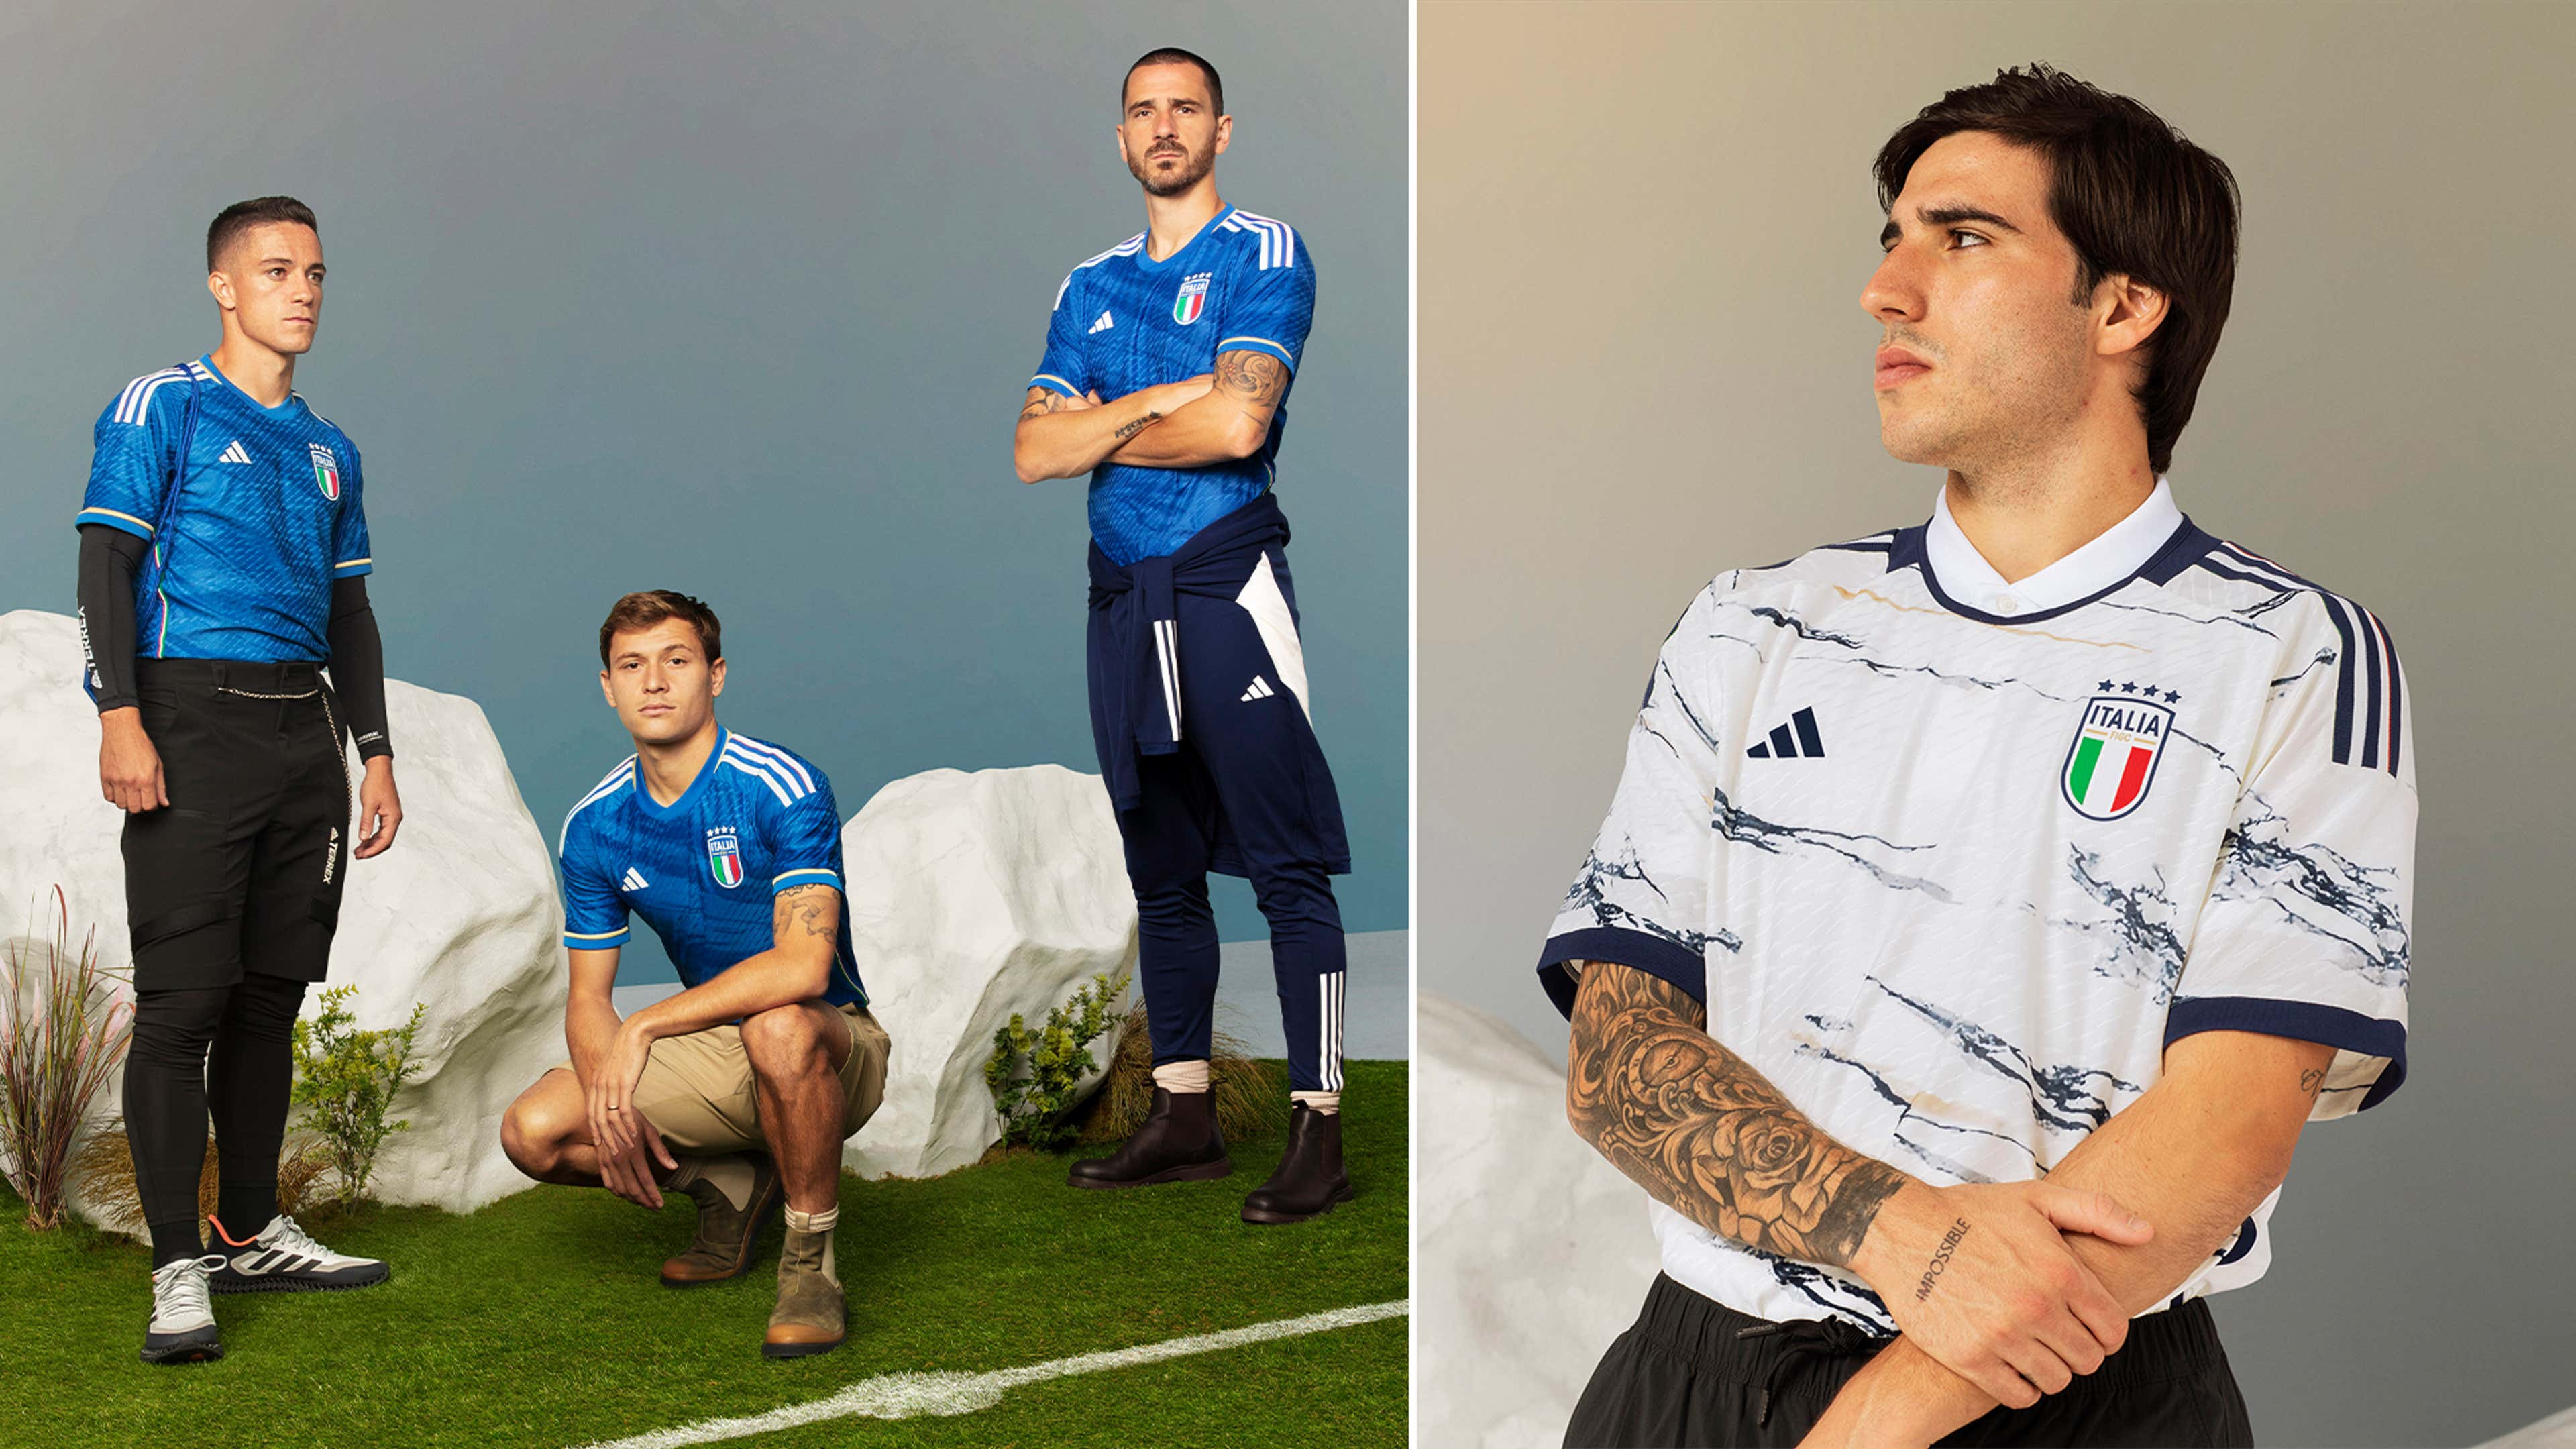 adidas and Italy unveil the all-new Italy 23 kits infused with